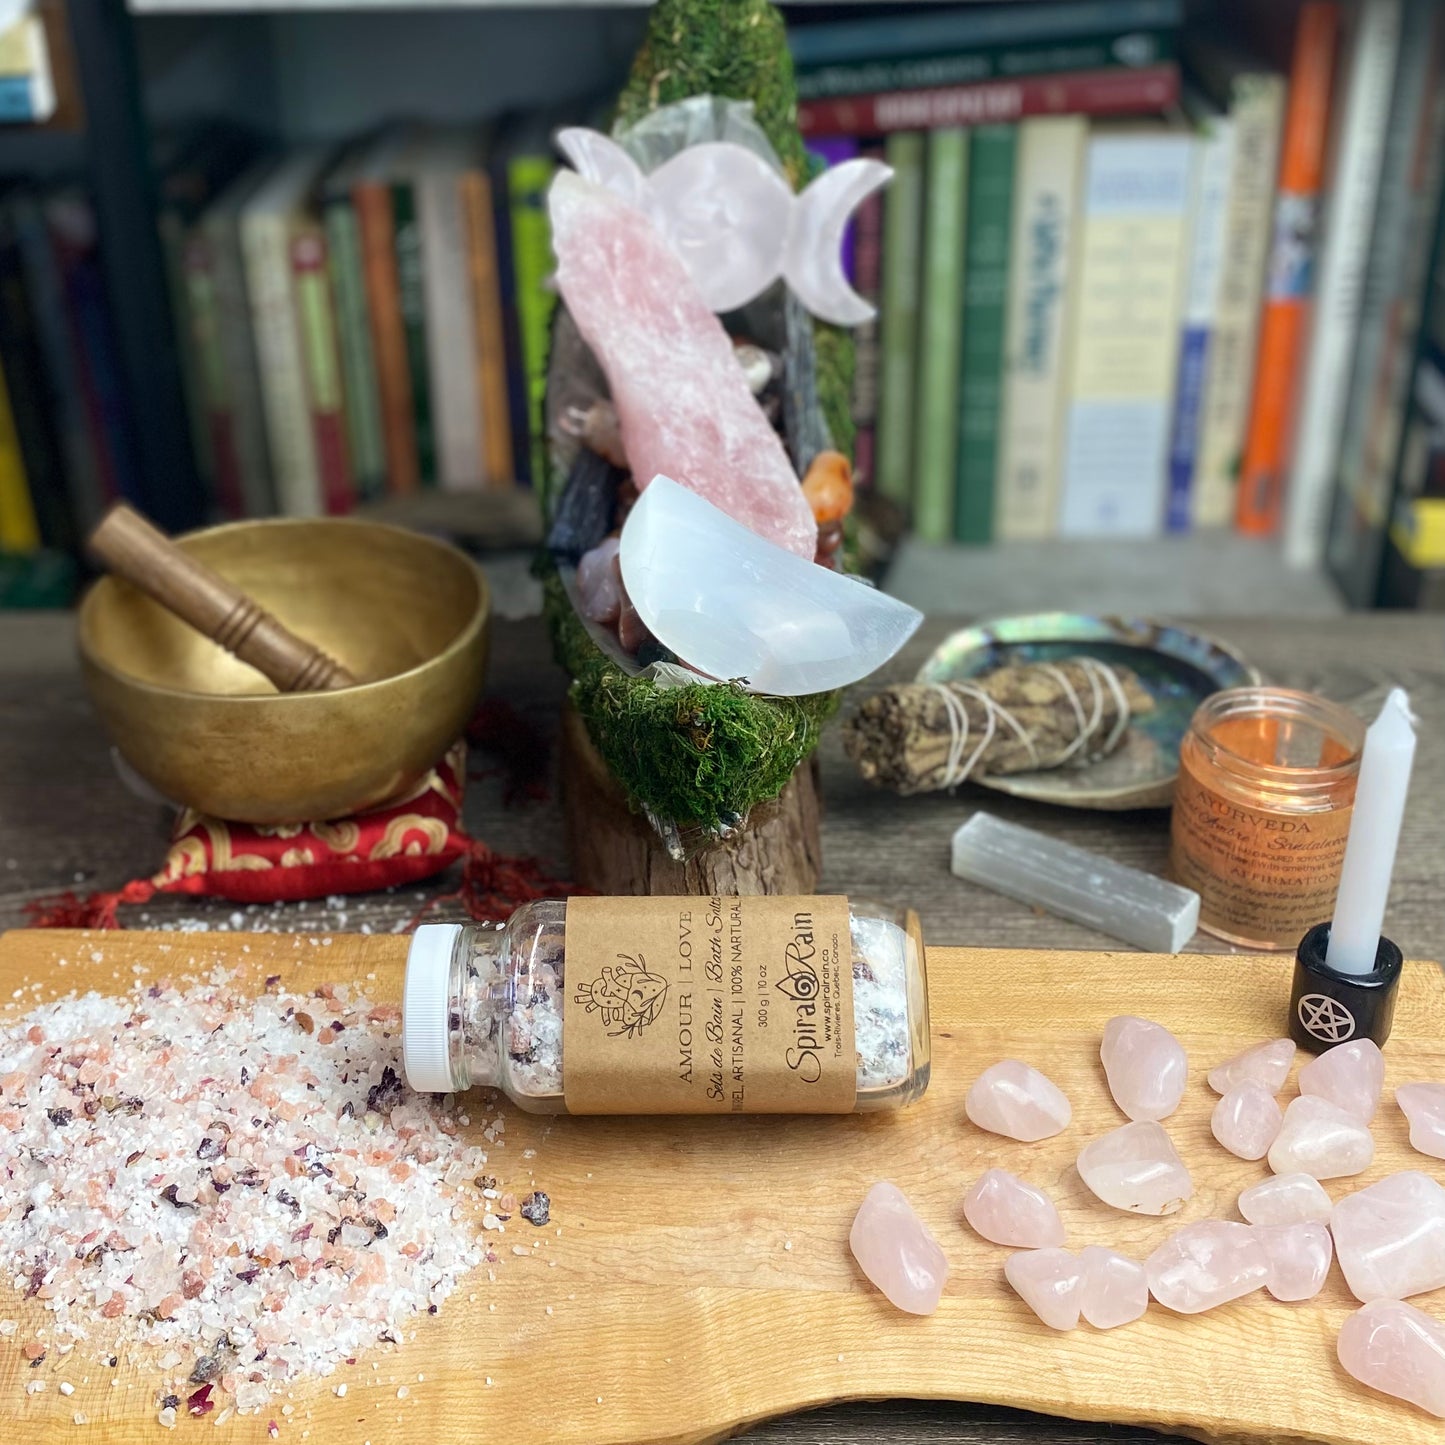 Love bath salts at $20 only from Spiral Rain